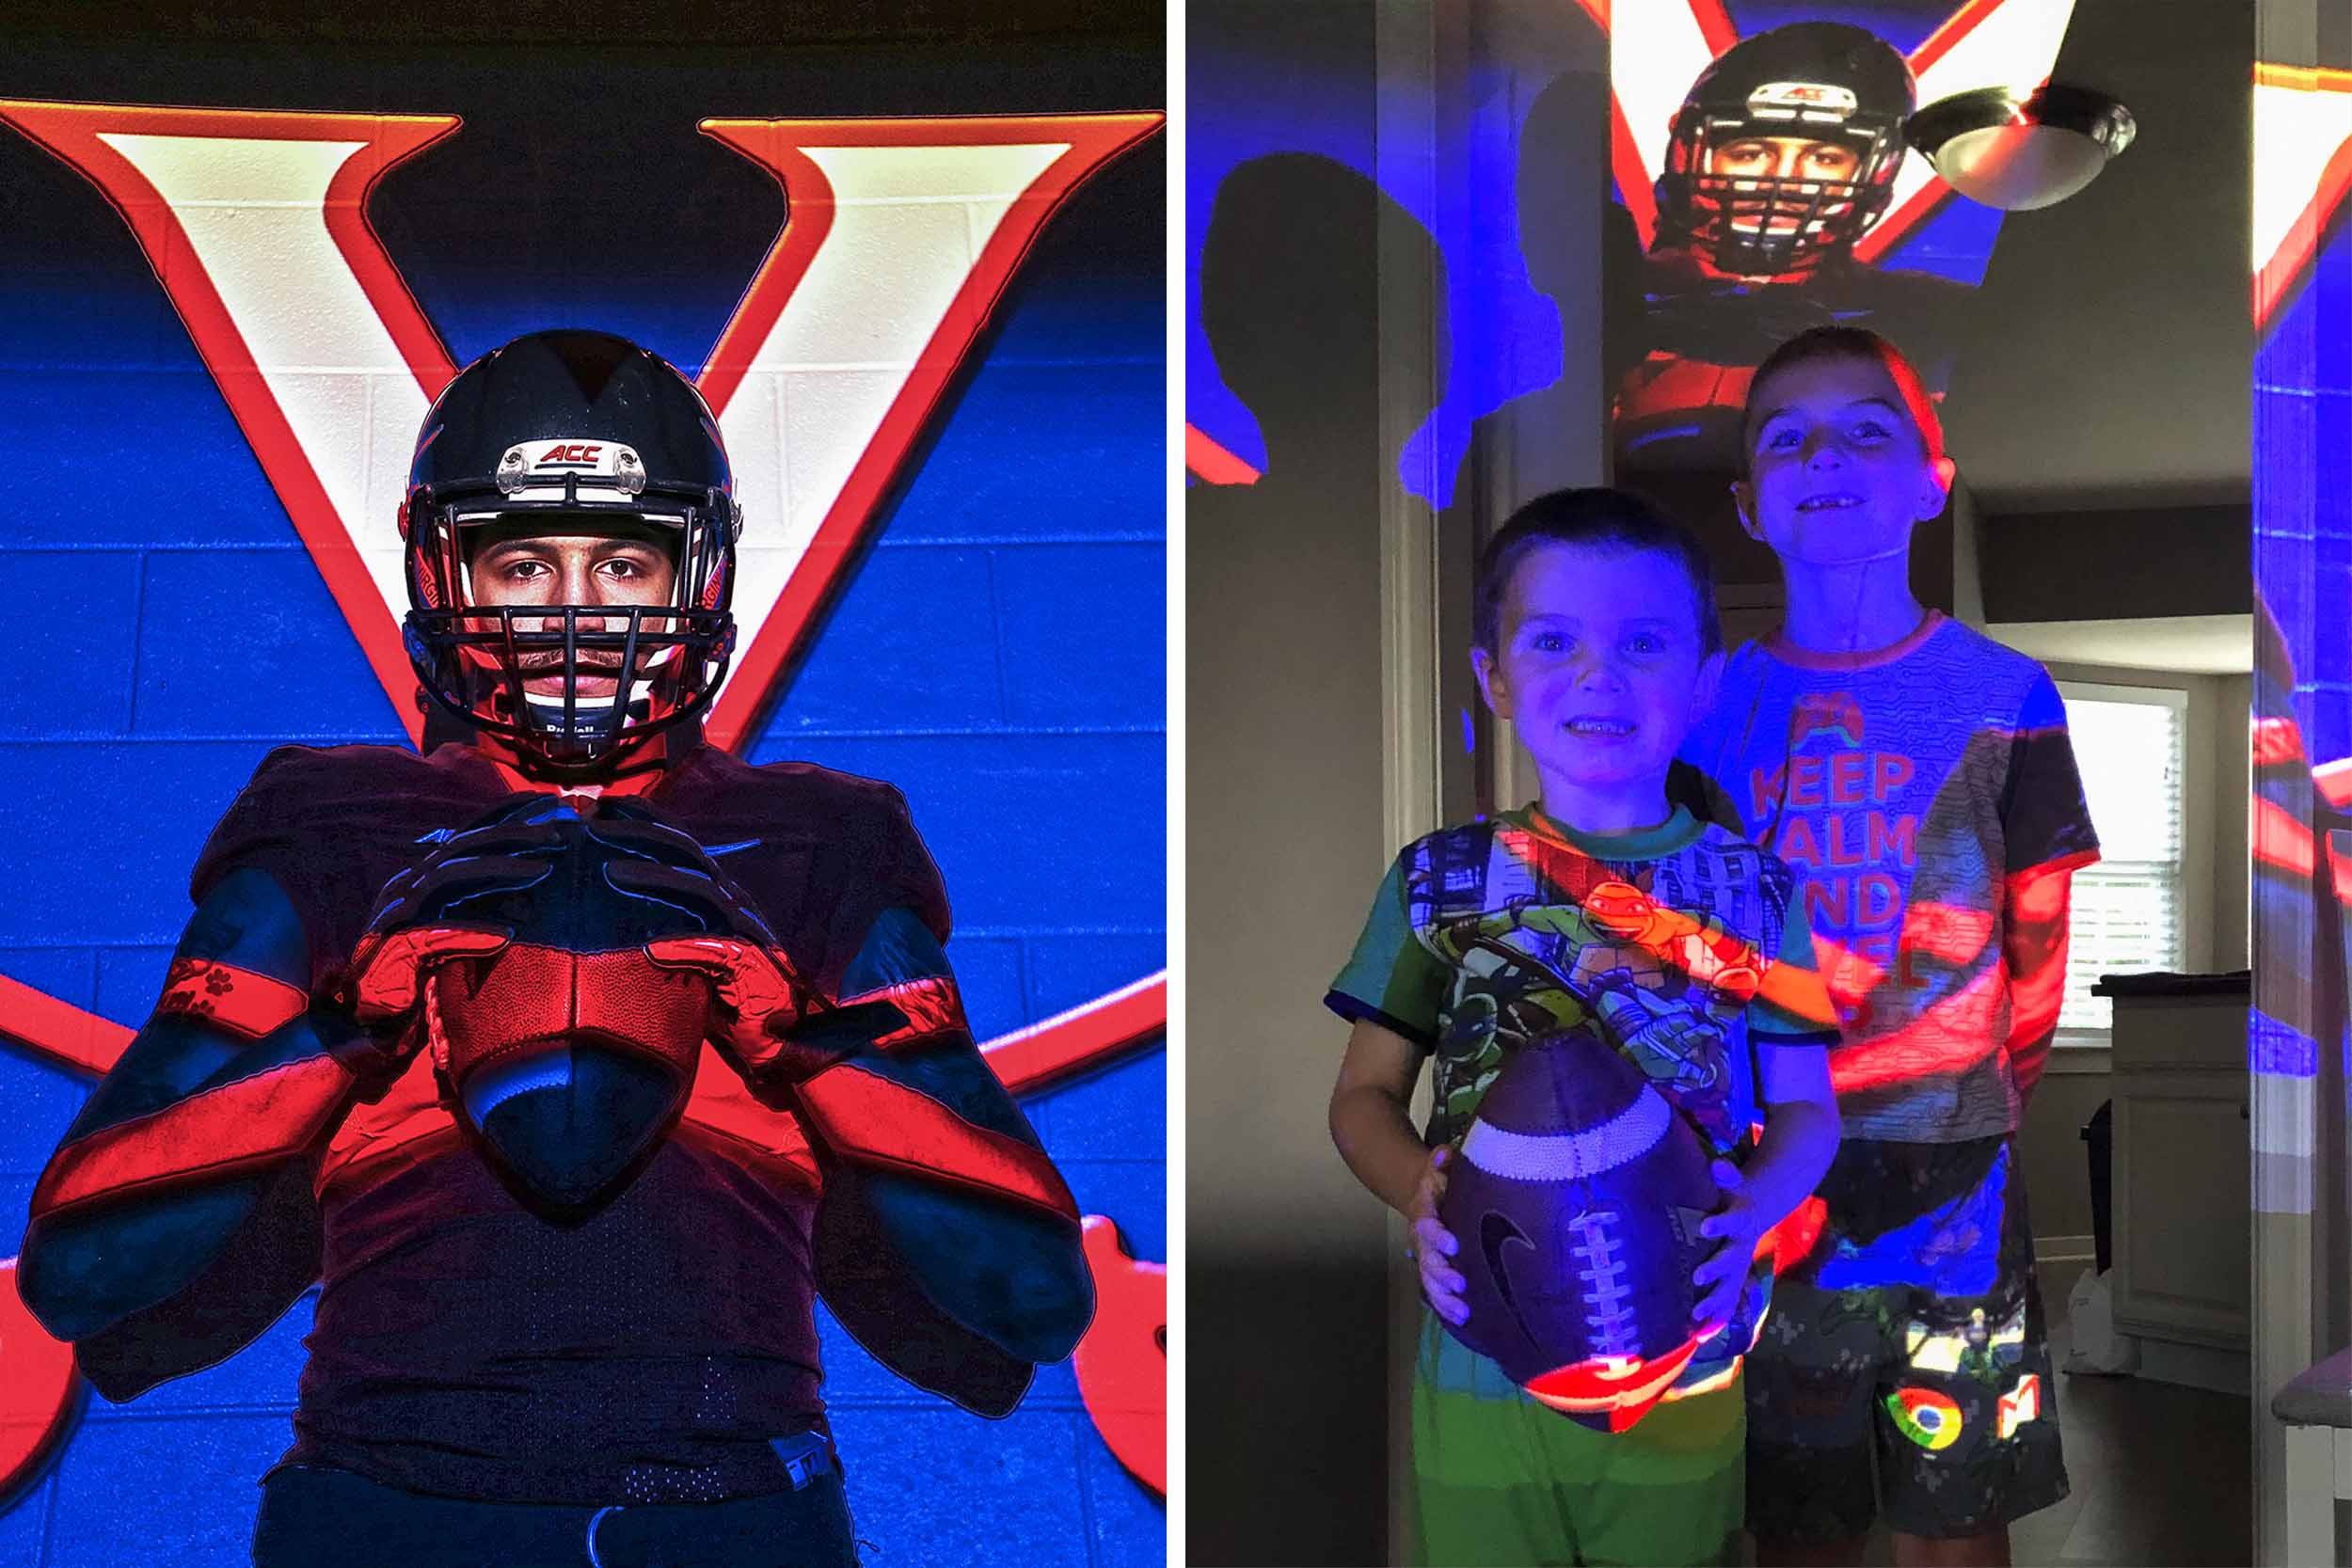 left: UVA football player standing with a UVA logo shining on him right: two little boys replicating the photo on the left